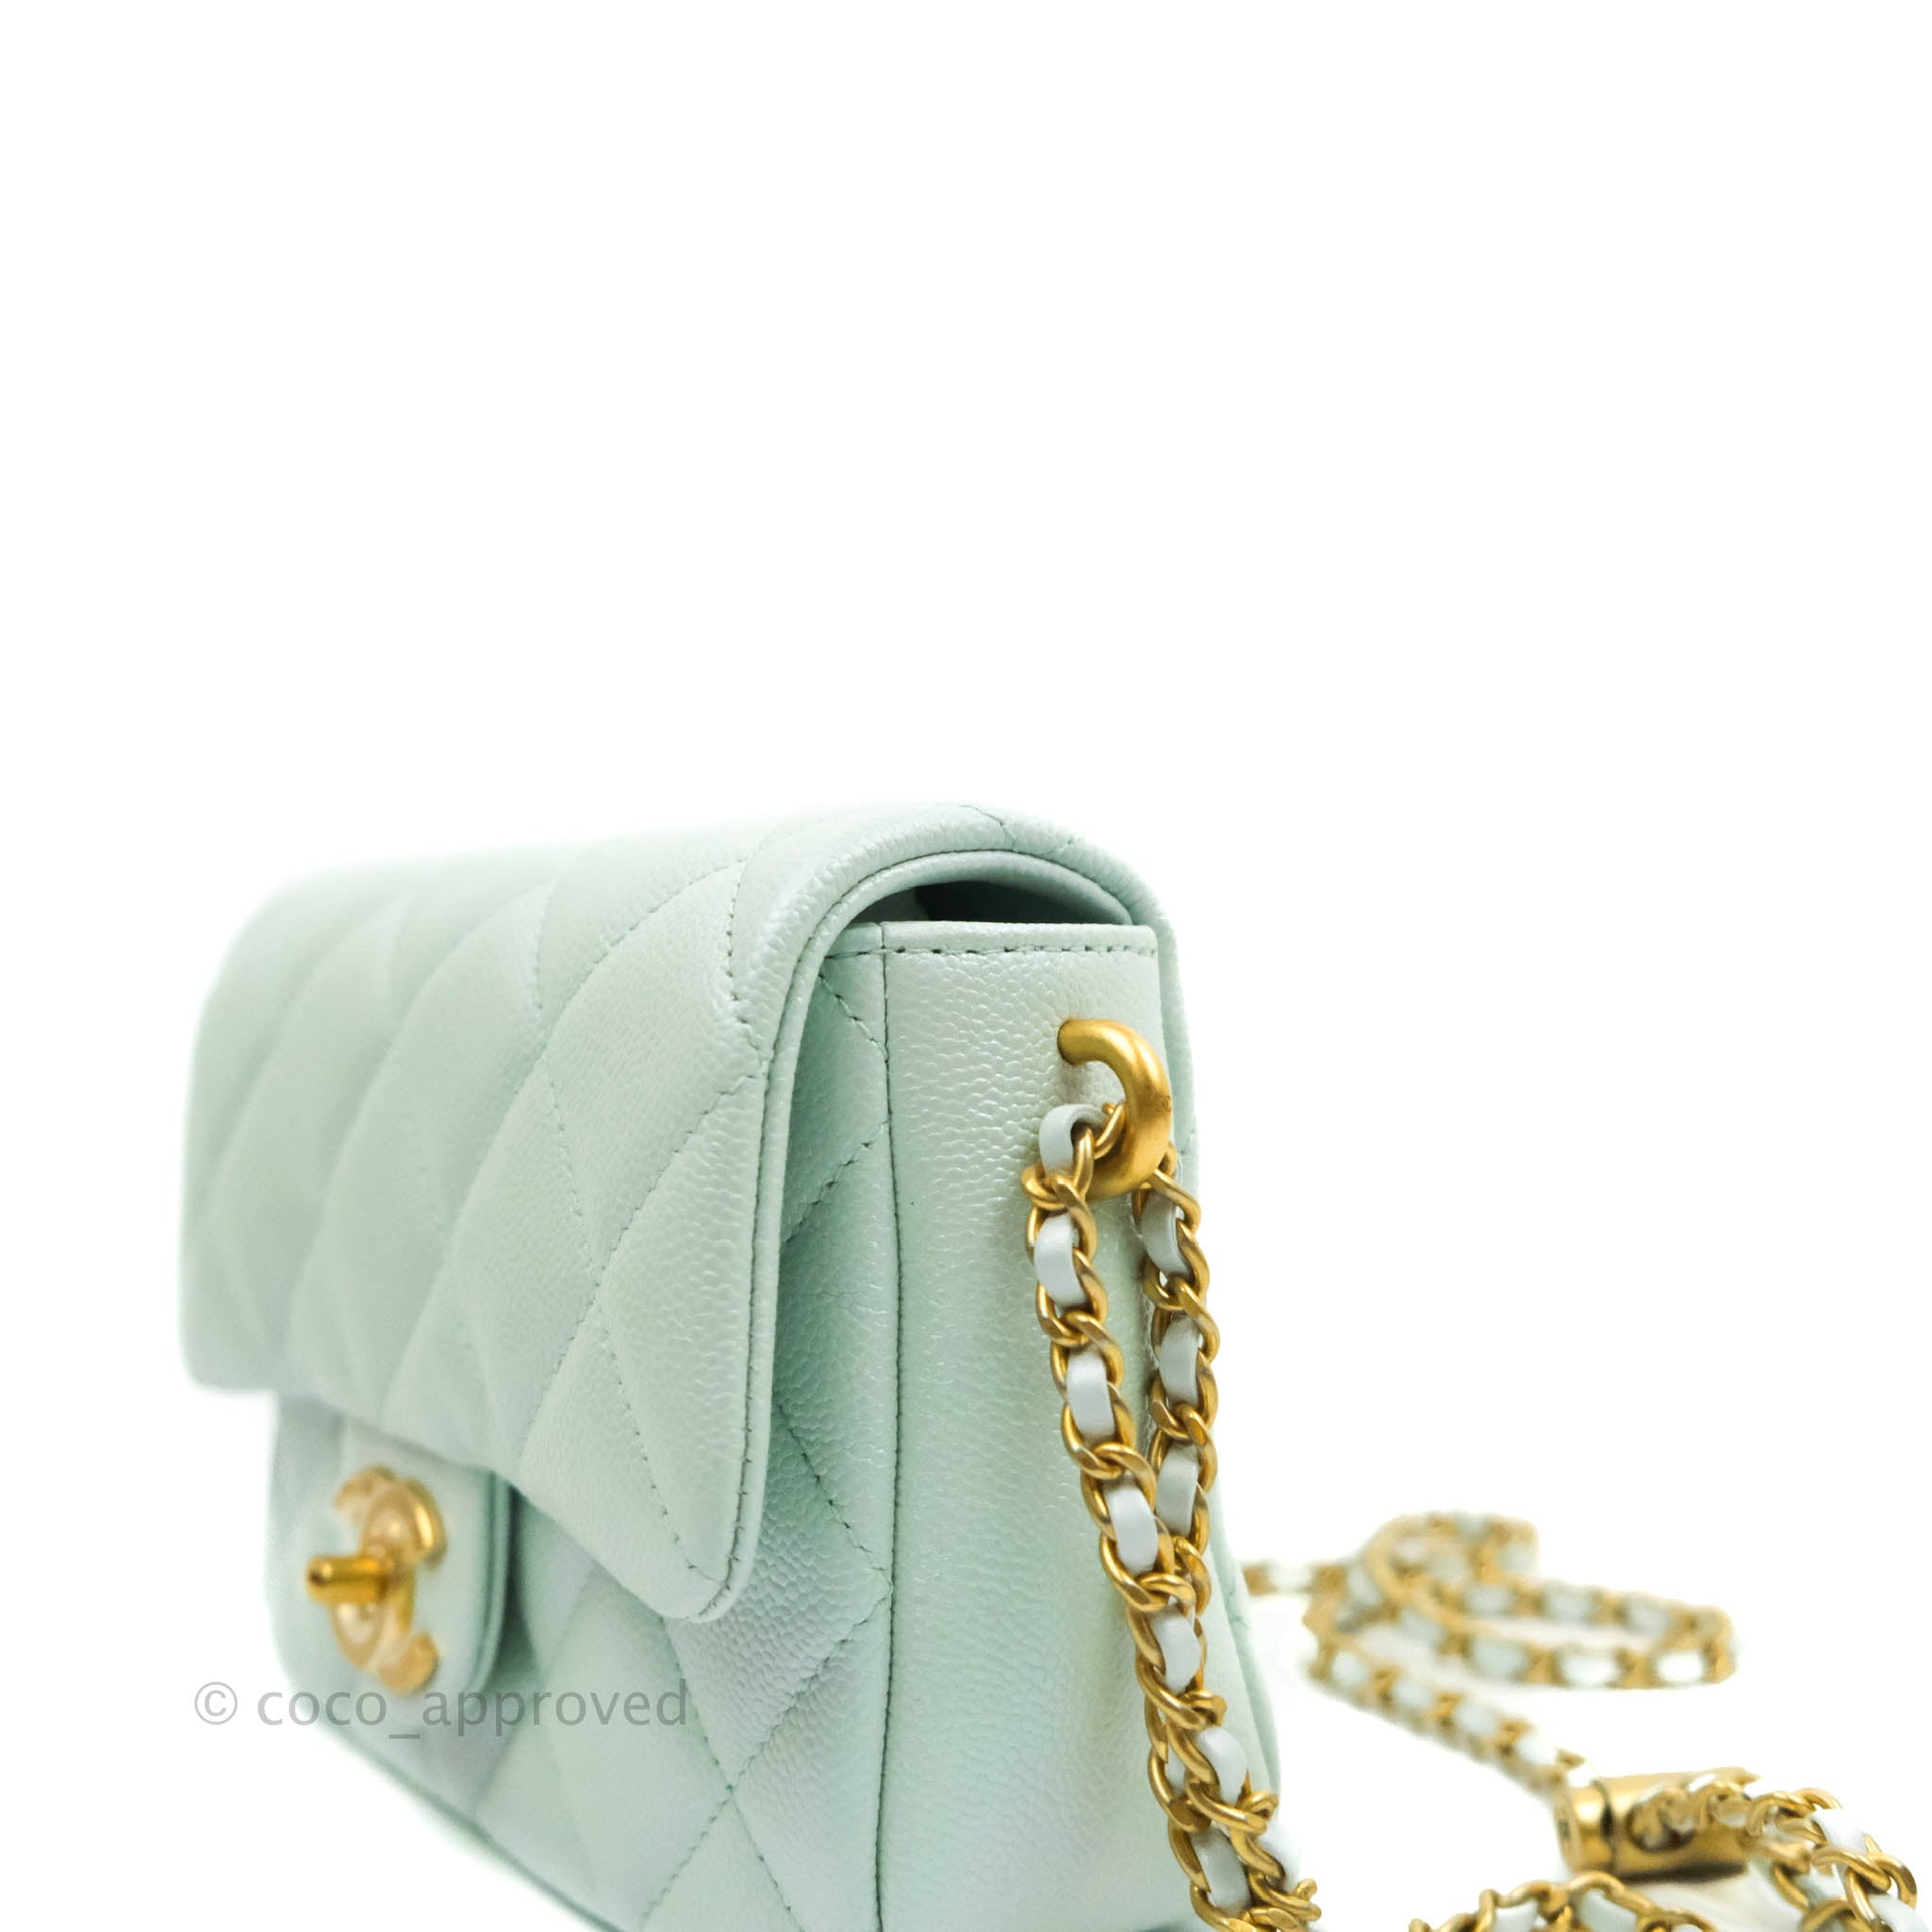 Chanel Quilted My Perfect Mini Iridescent Mint Green Caviar Aged